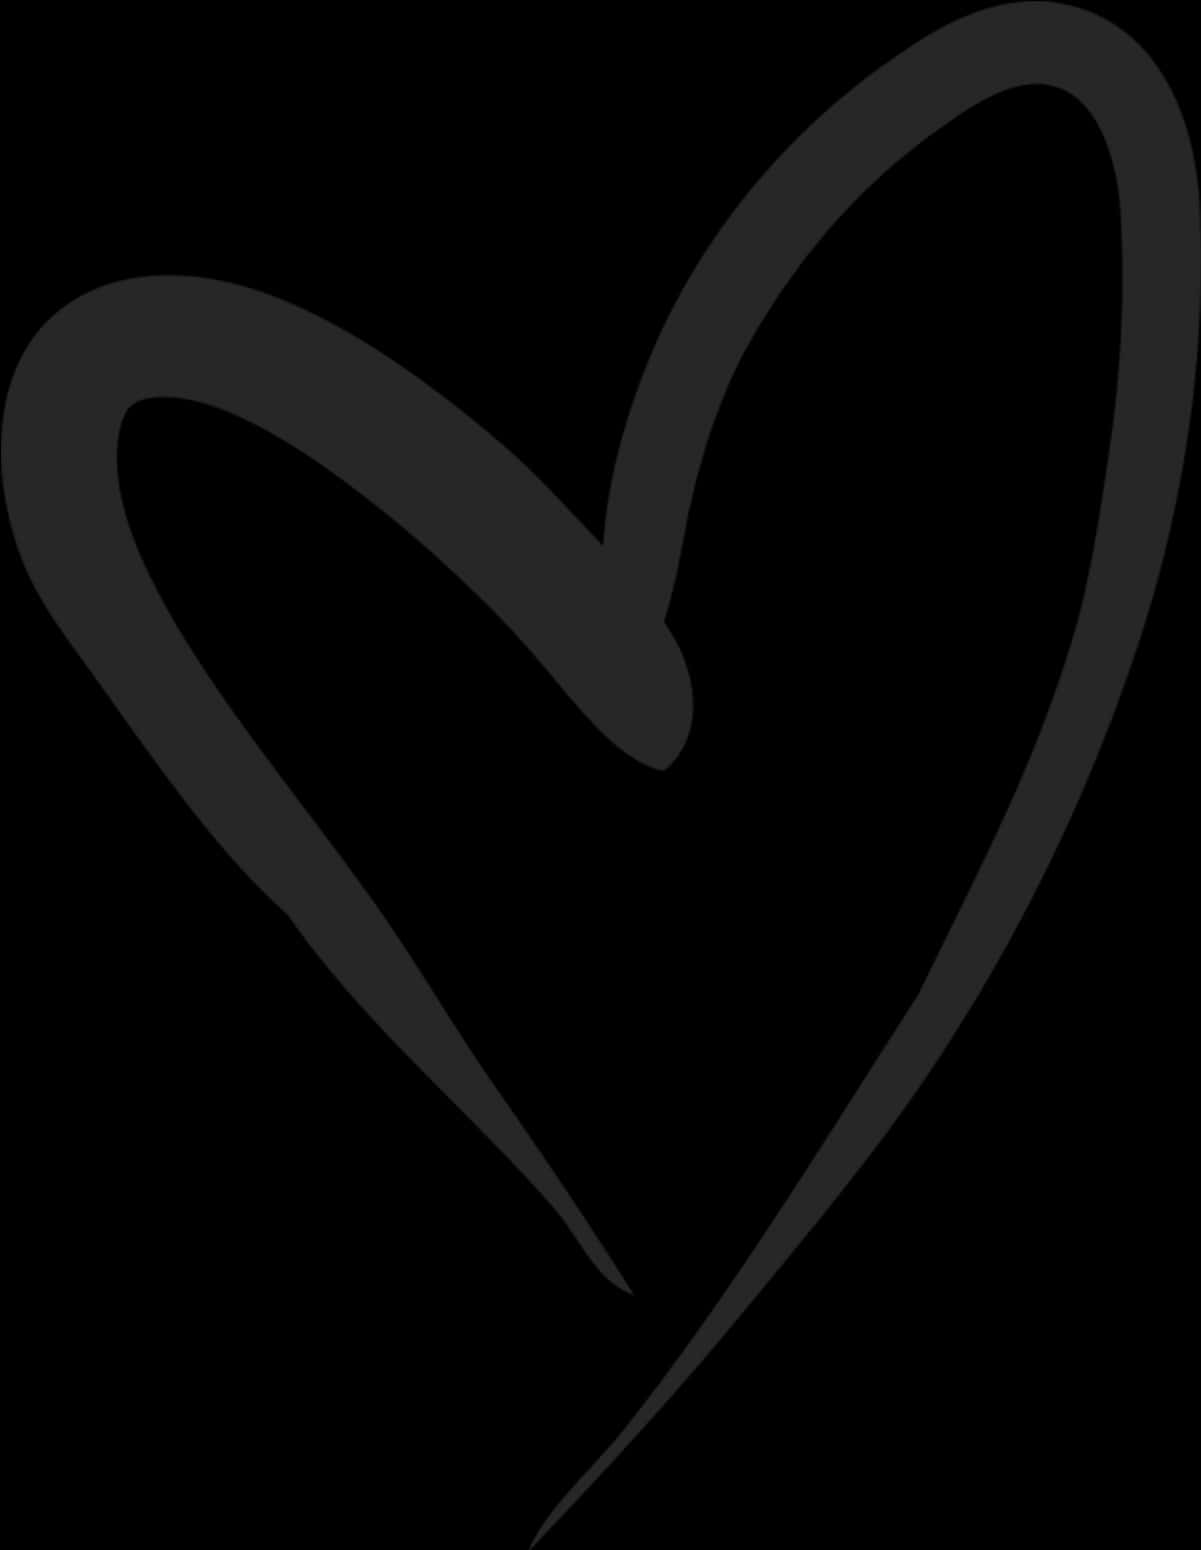 Abstract Black Heart Outline PNG